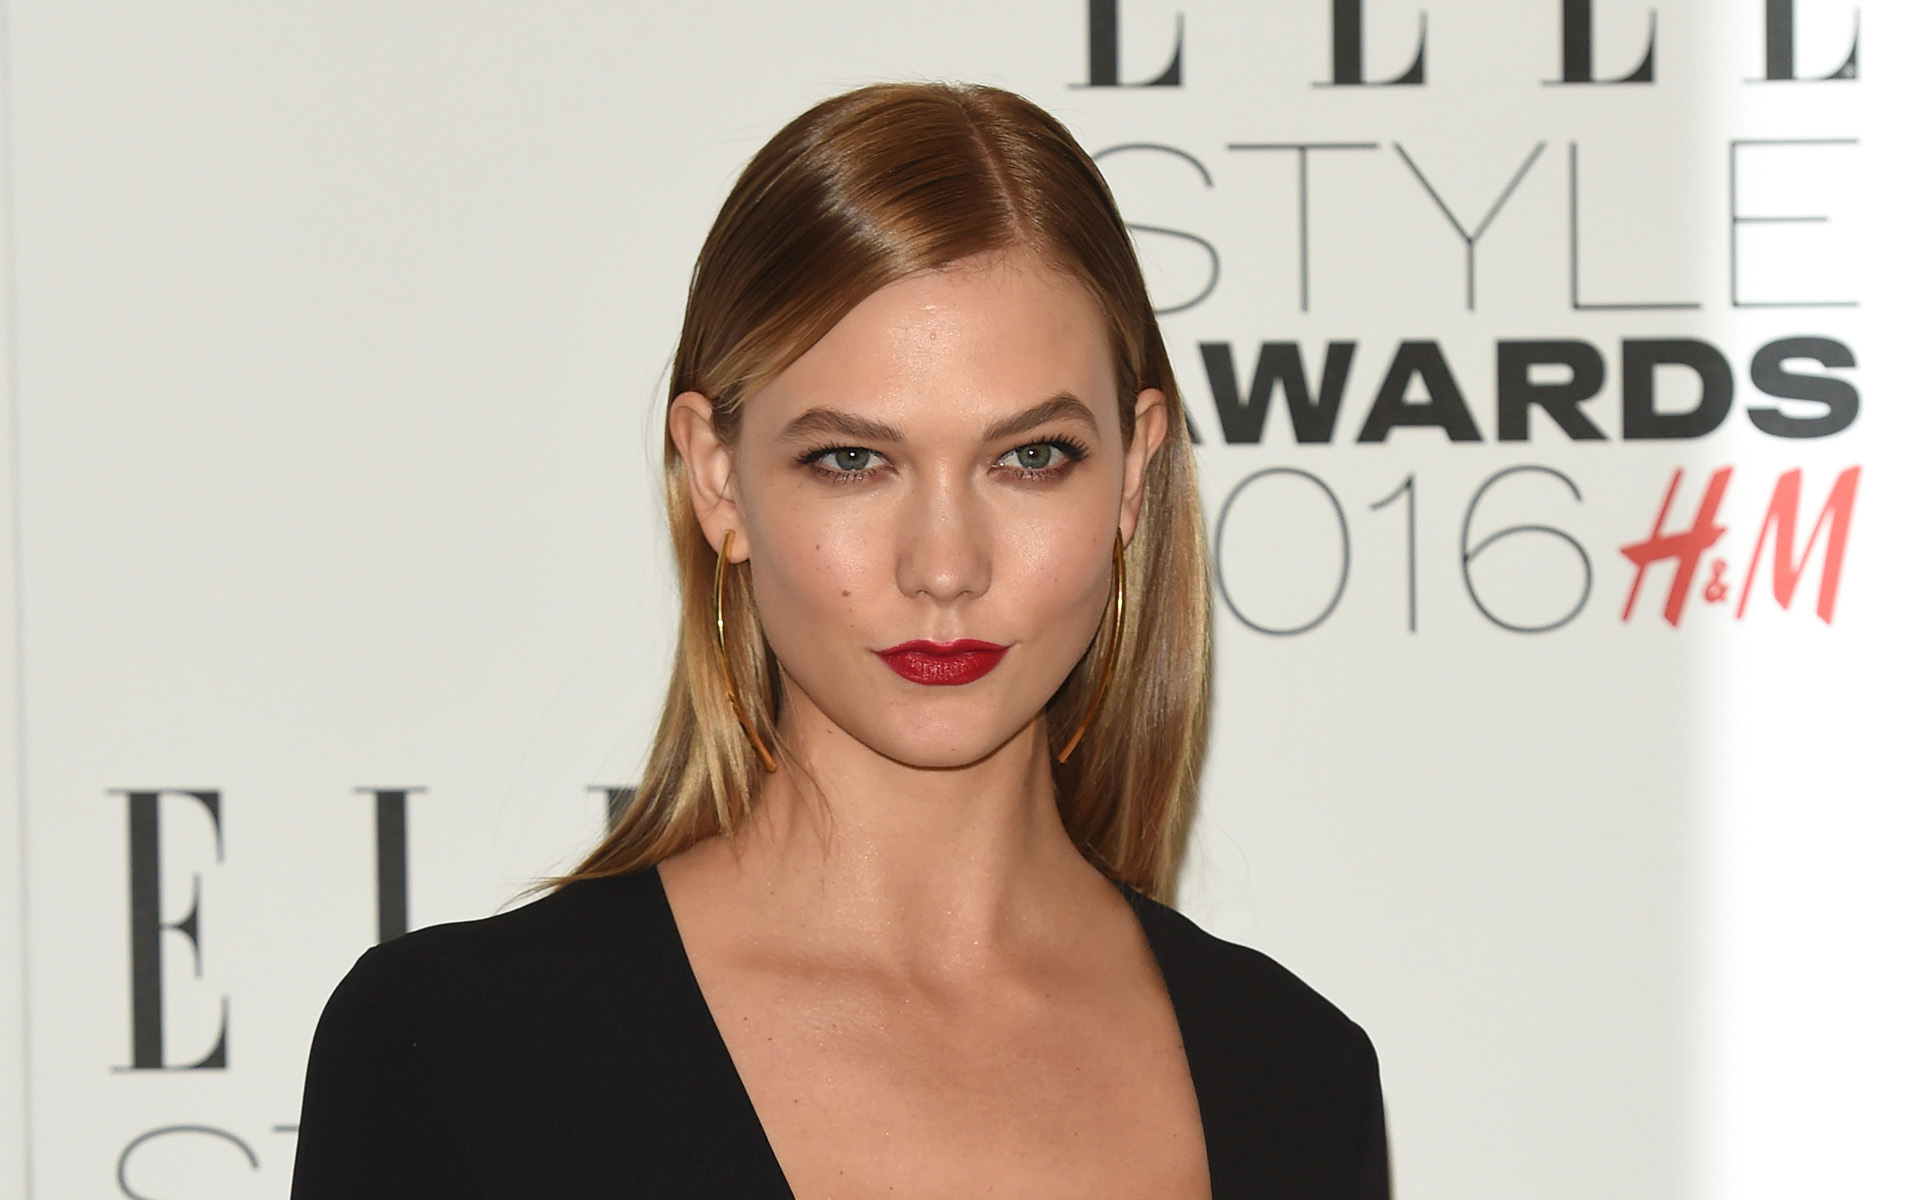 Kloss Portrait At The Elle Style Awards In Londo Wallpaper